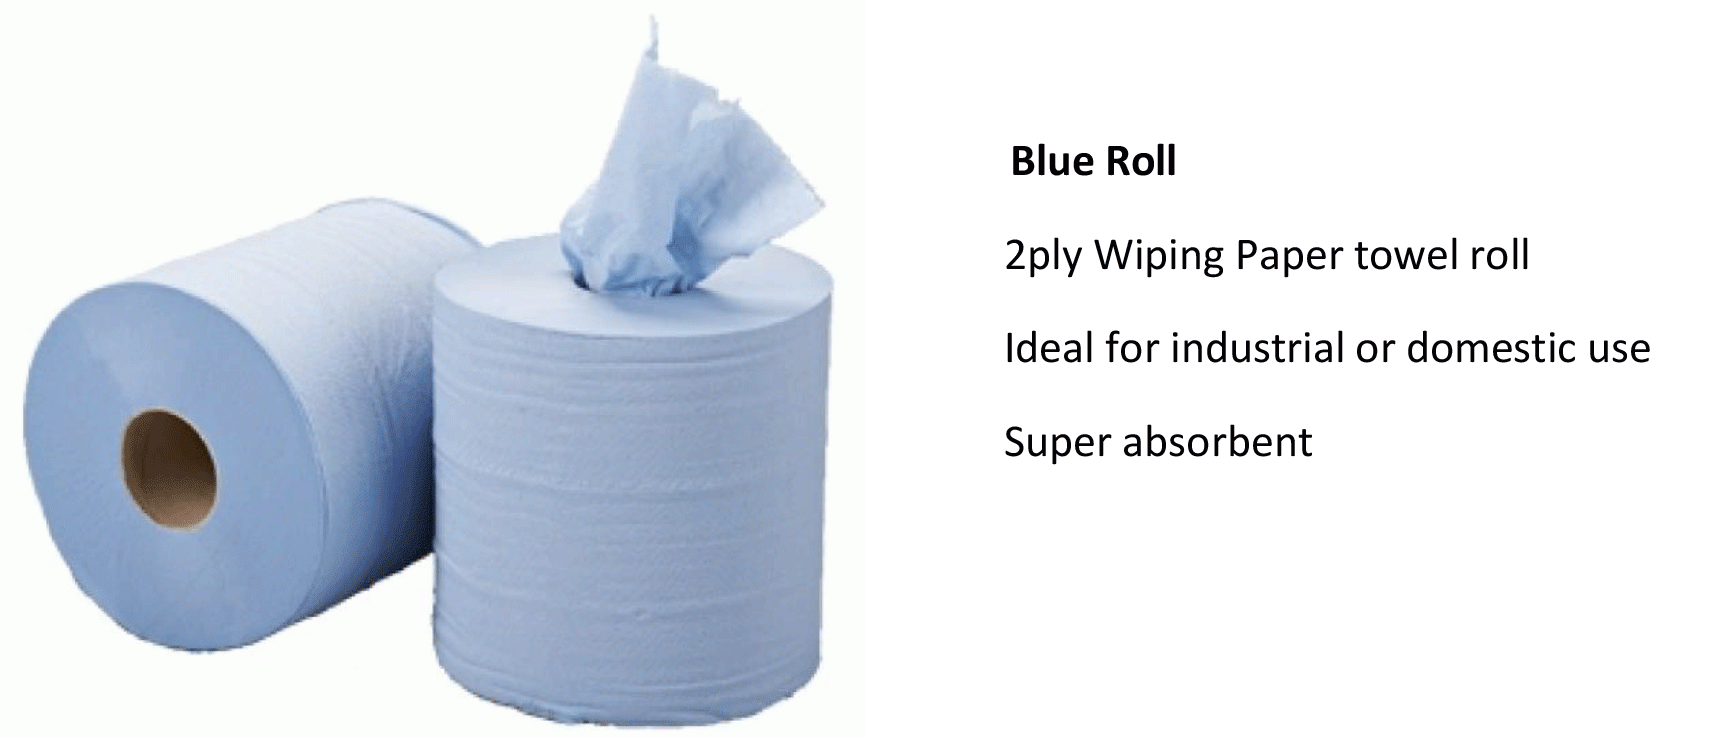 Blue-Roll-info-to-upload.gif#asset:9202